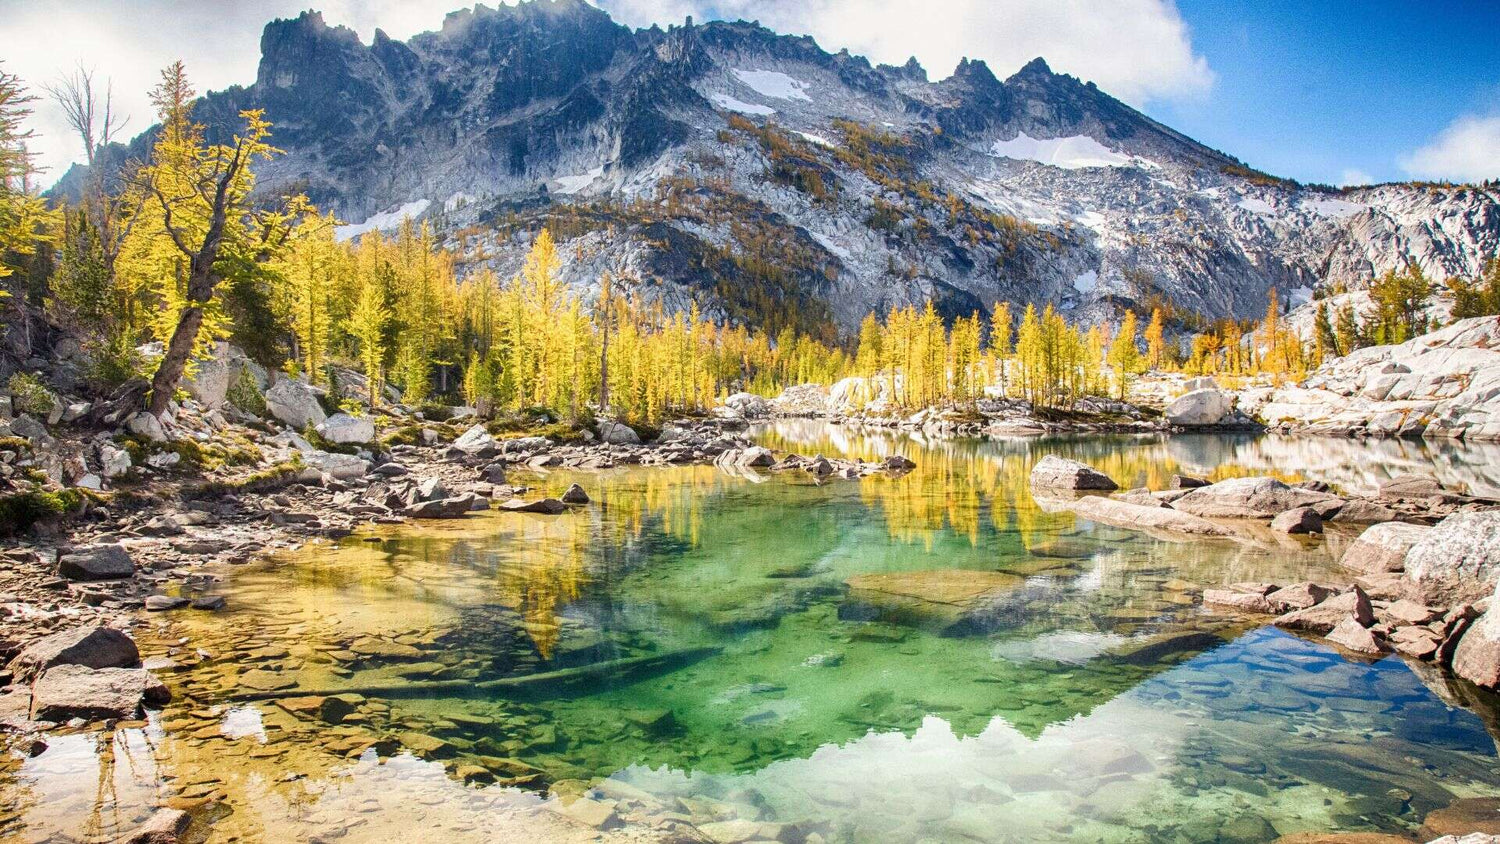 A view of The Enchantments in Washington features a clear pond in the middle and a mountain range in the background. - History By Mail